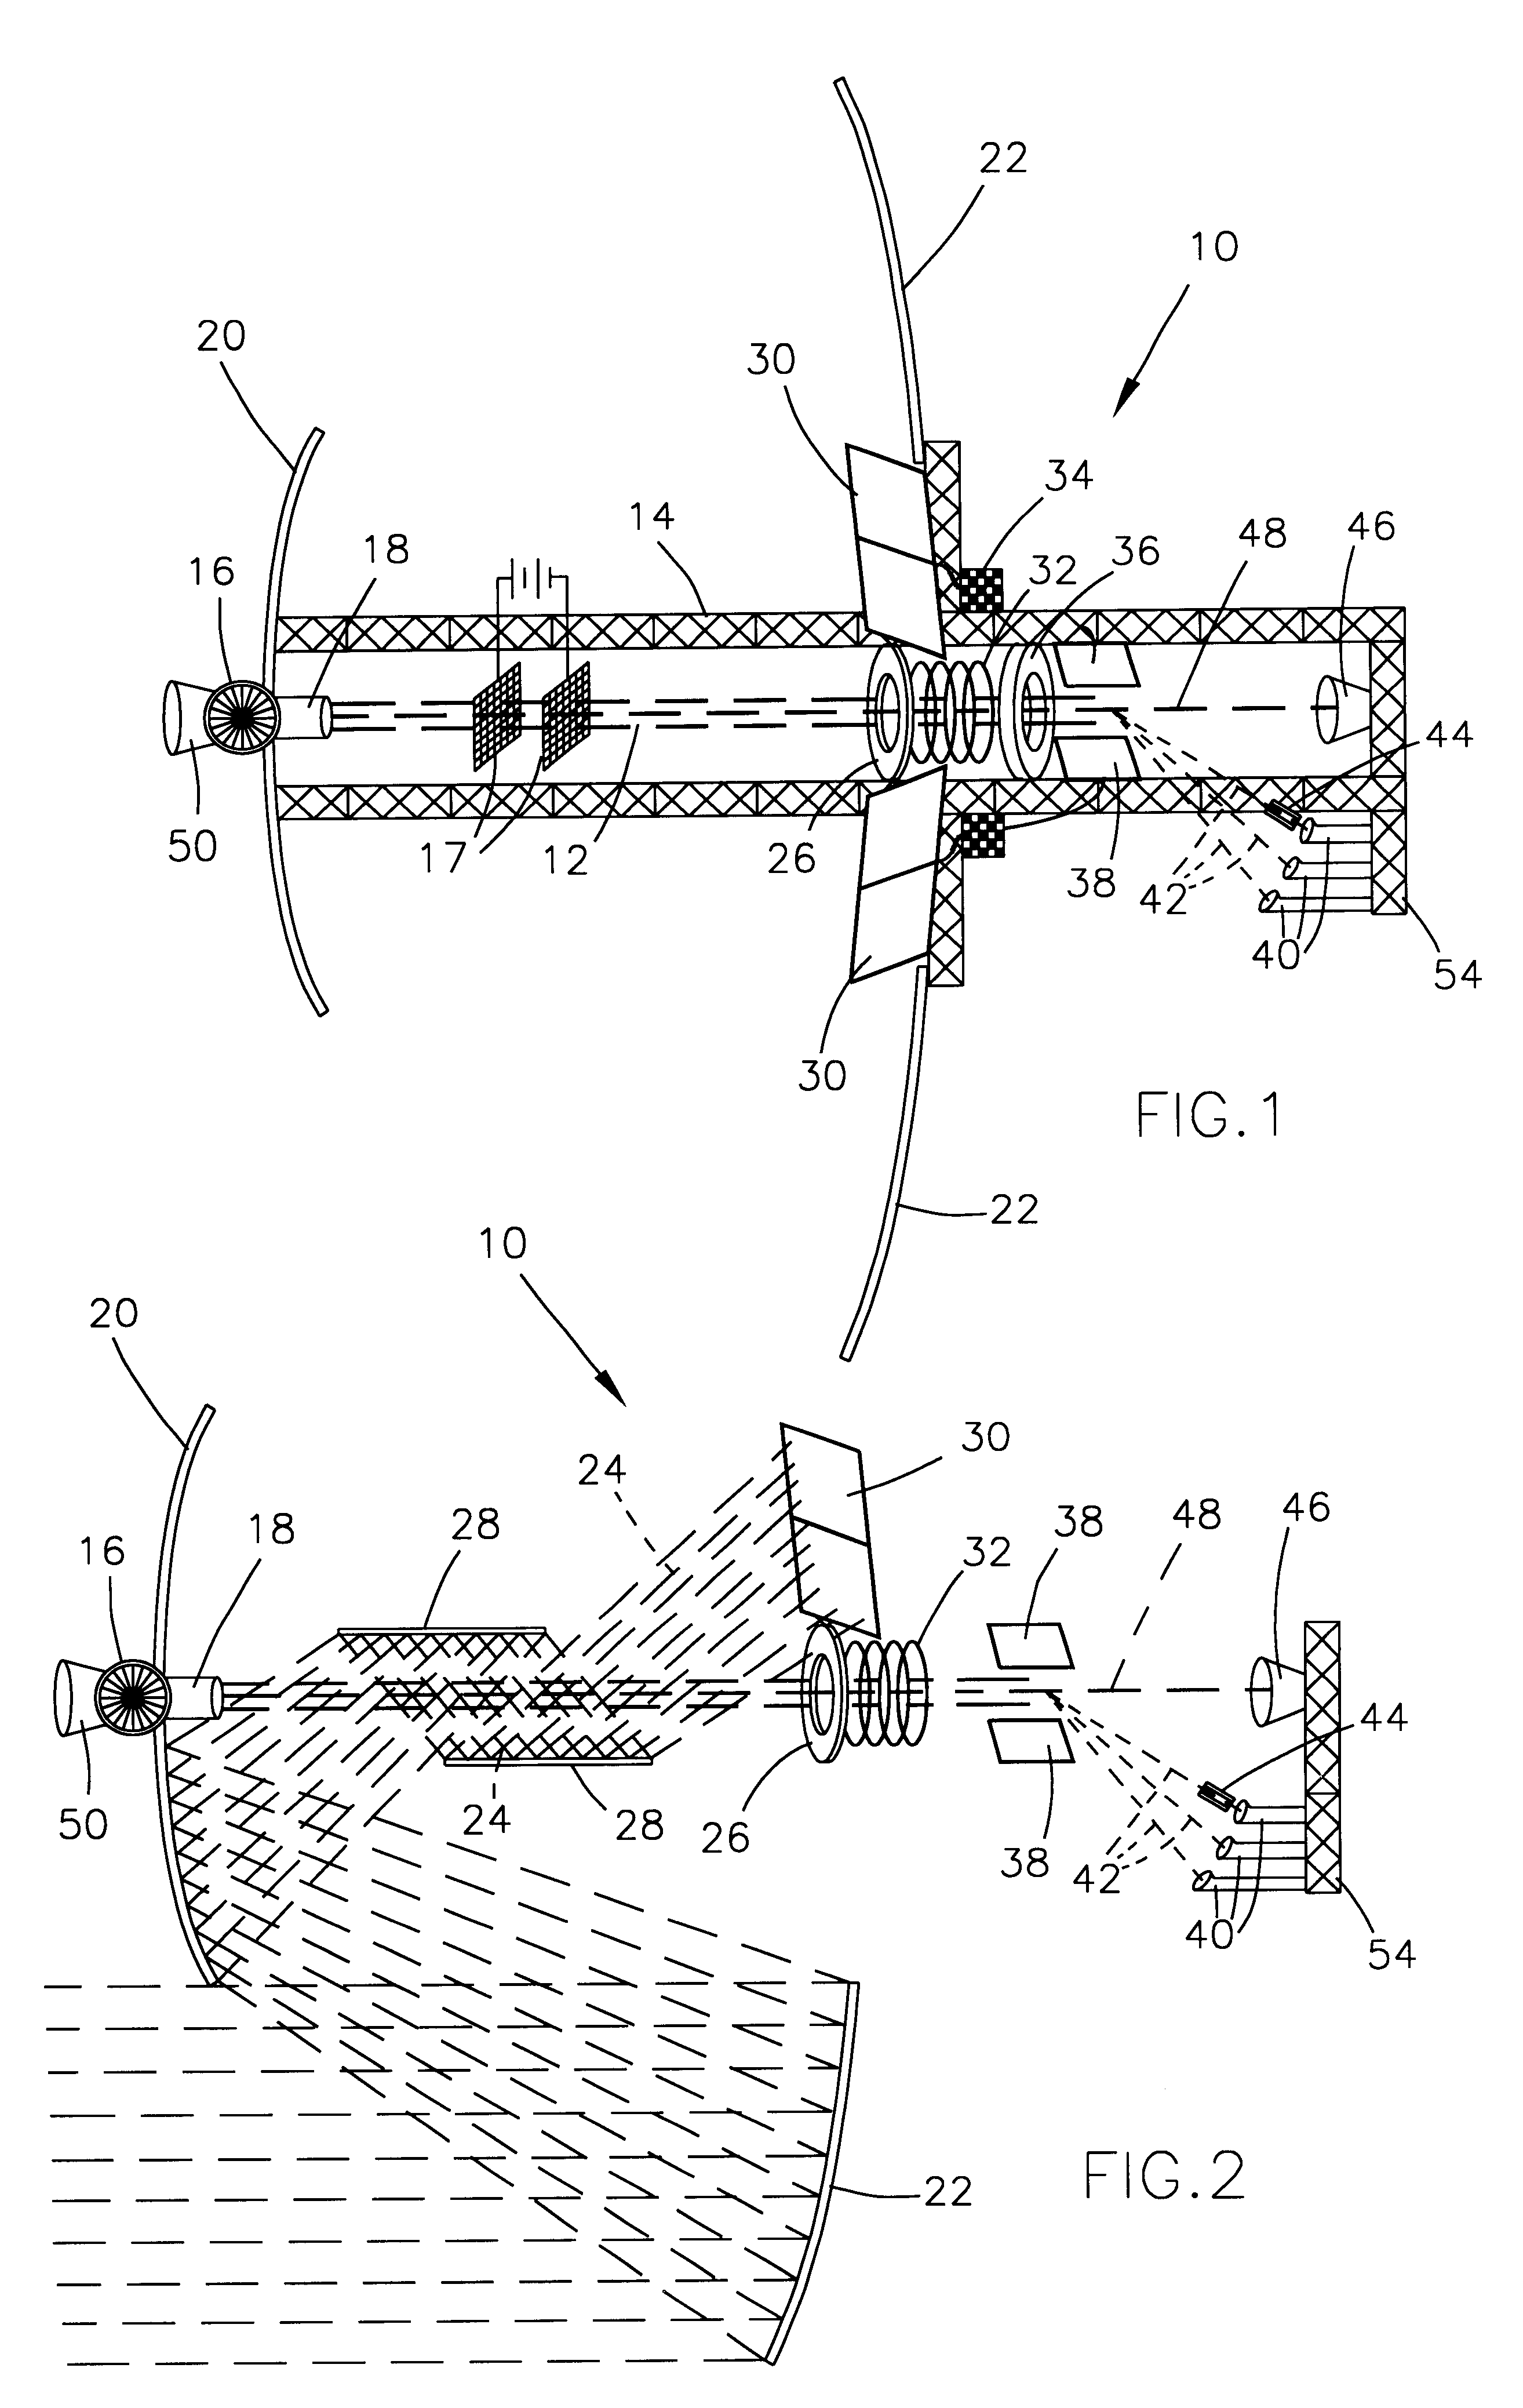 Process and apparatus for continuous-feed all-isotope separation in microgravity using solar power